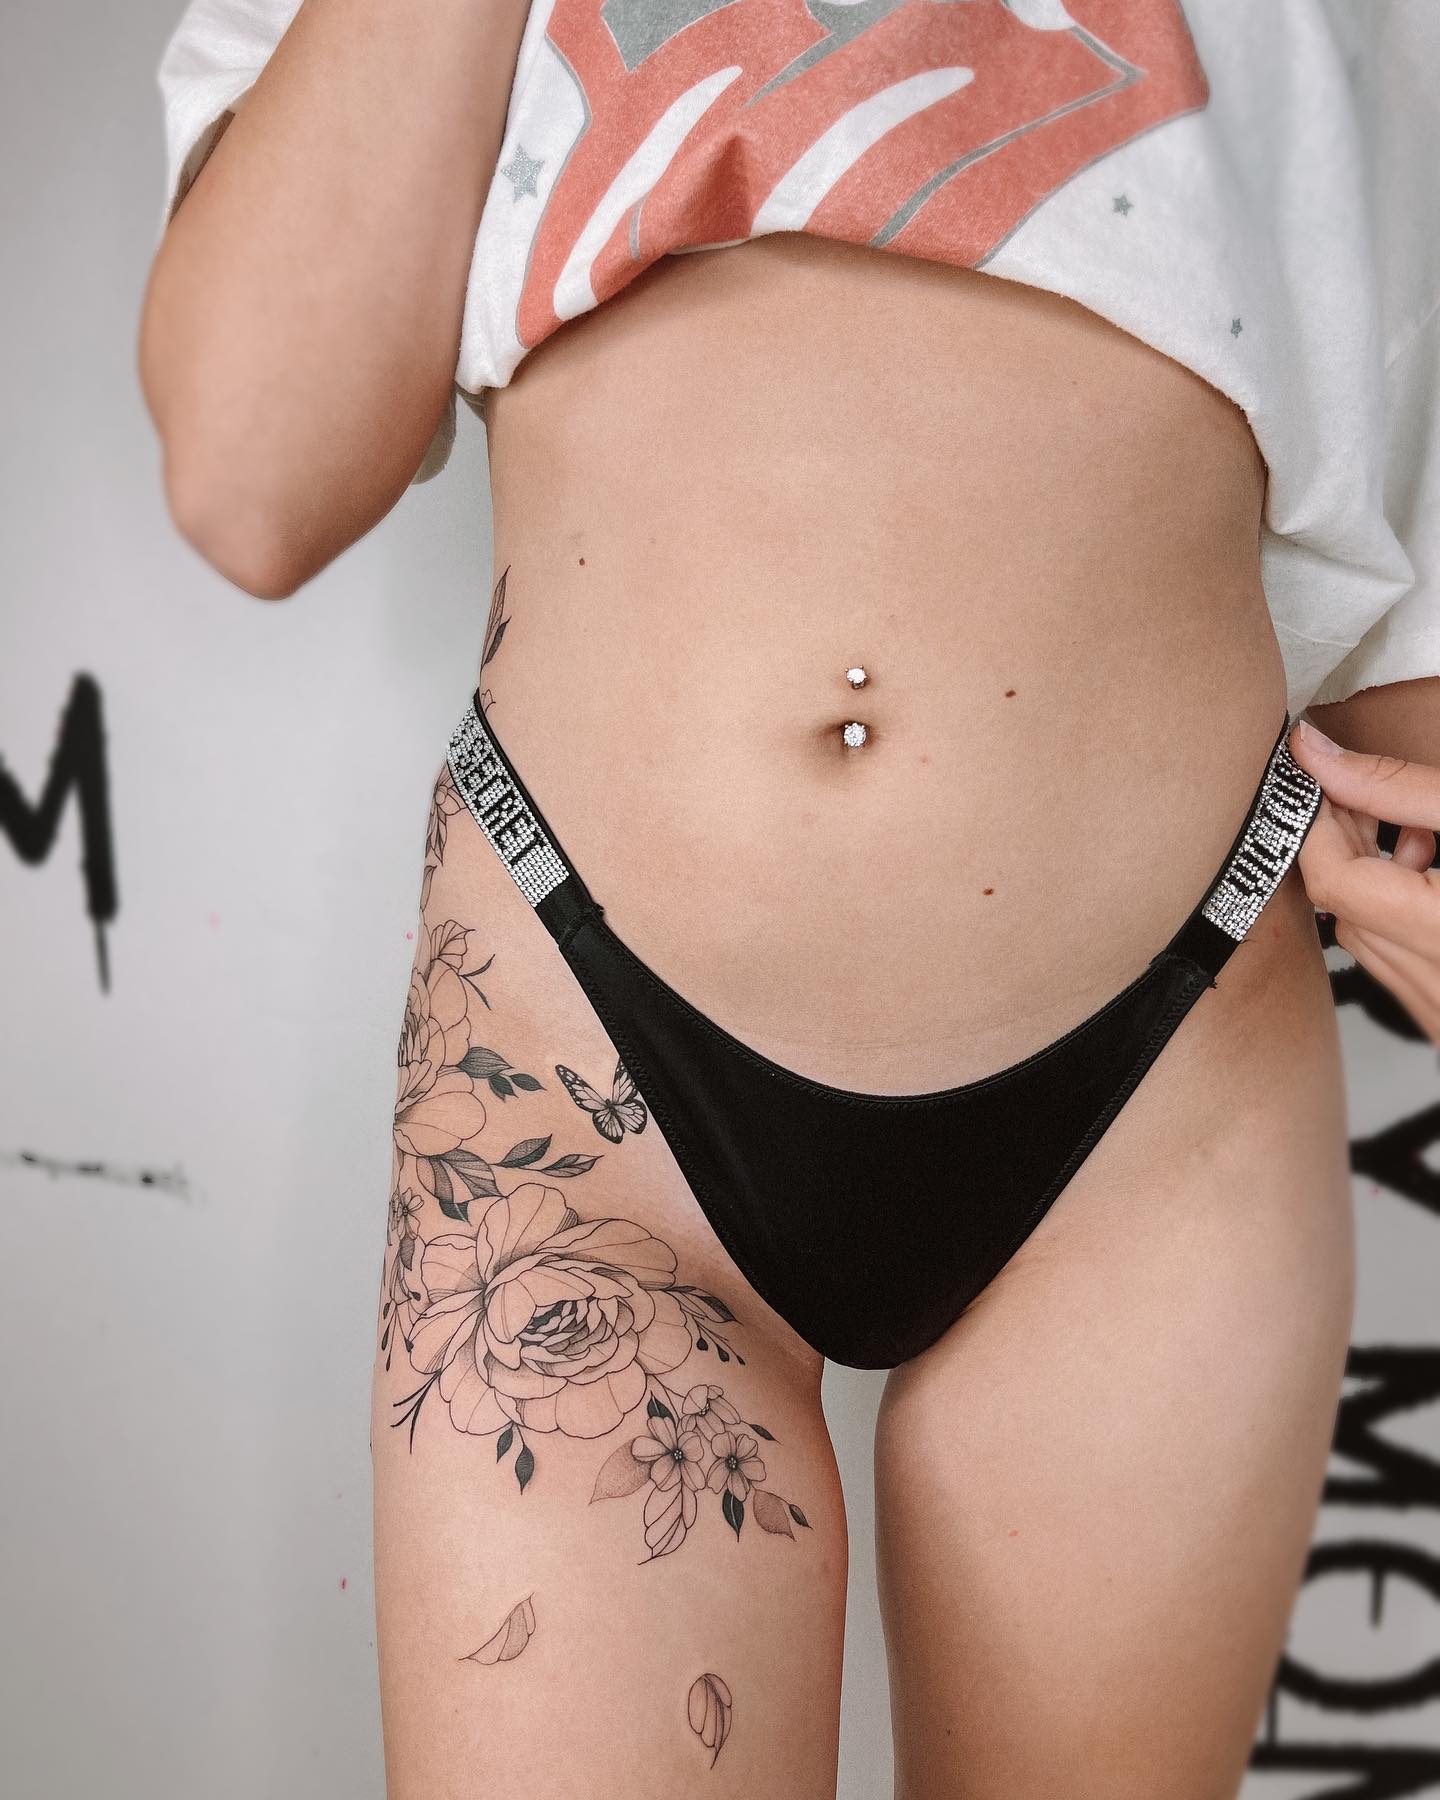 Black and white ink tattoo such as this one is for those who like dominant ideas. Are you a picky person? How about something sweet, feminine, and sensual? This artsy large hip and leg tattoo will look the best on younger women who enjoy black ink concepts.